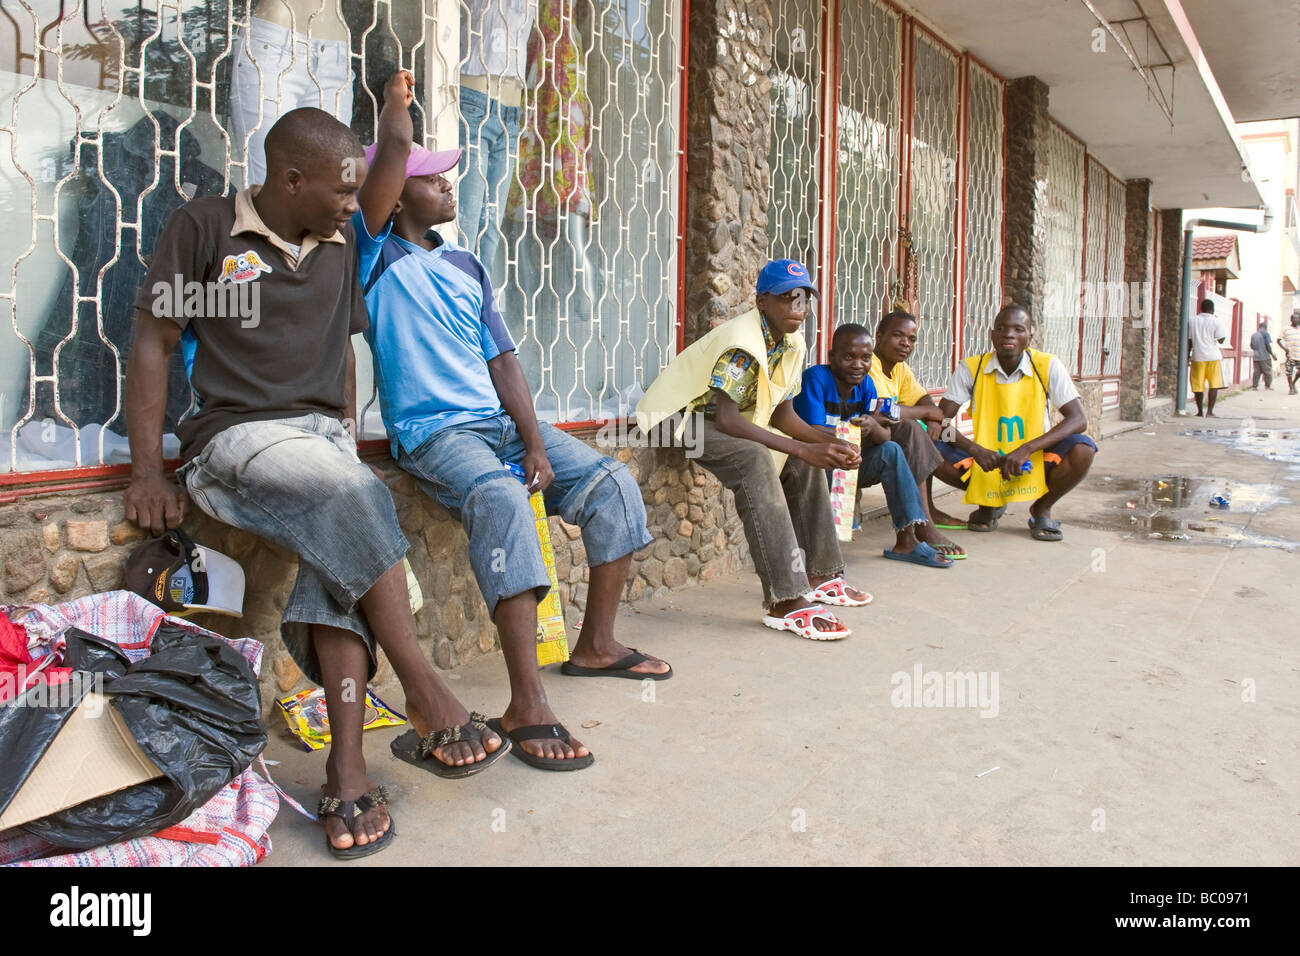 Street hawkers selling talk-time for mobile phones Quelimane Mozambique Stock Photo